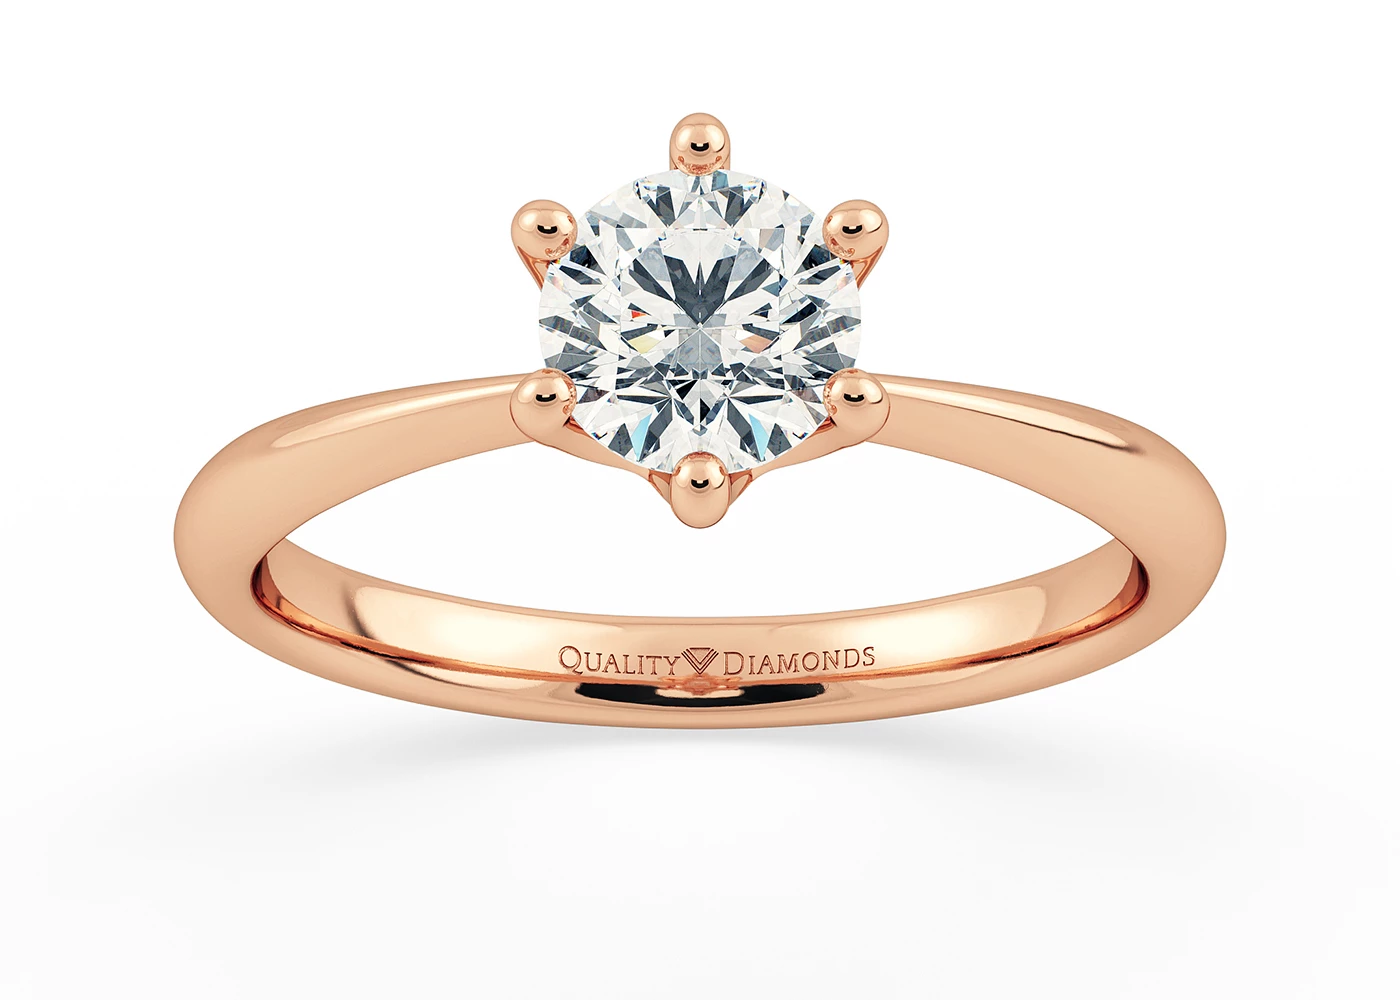 Six Claw Round Brilliant Amorette Diamond Ring in 18K Rose Gold